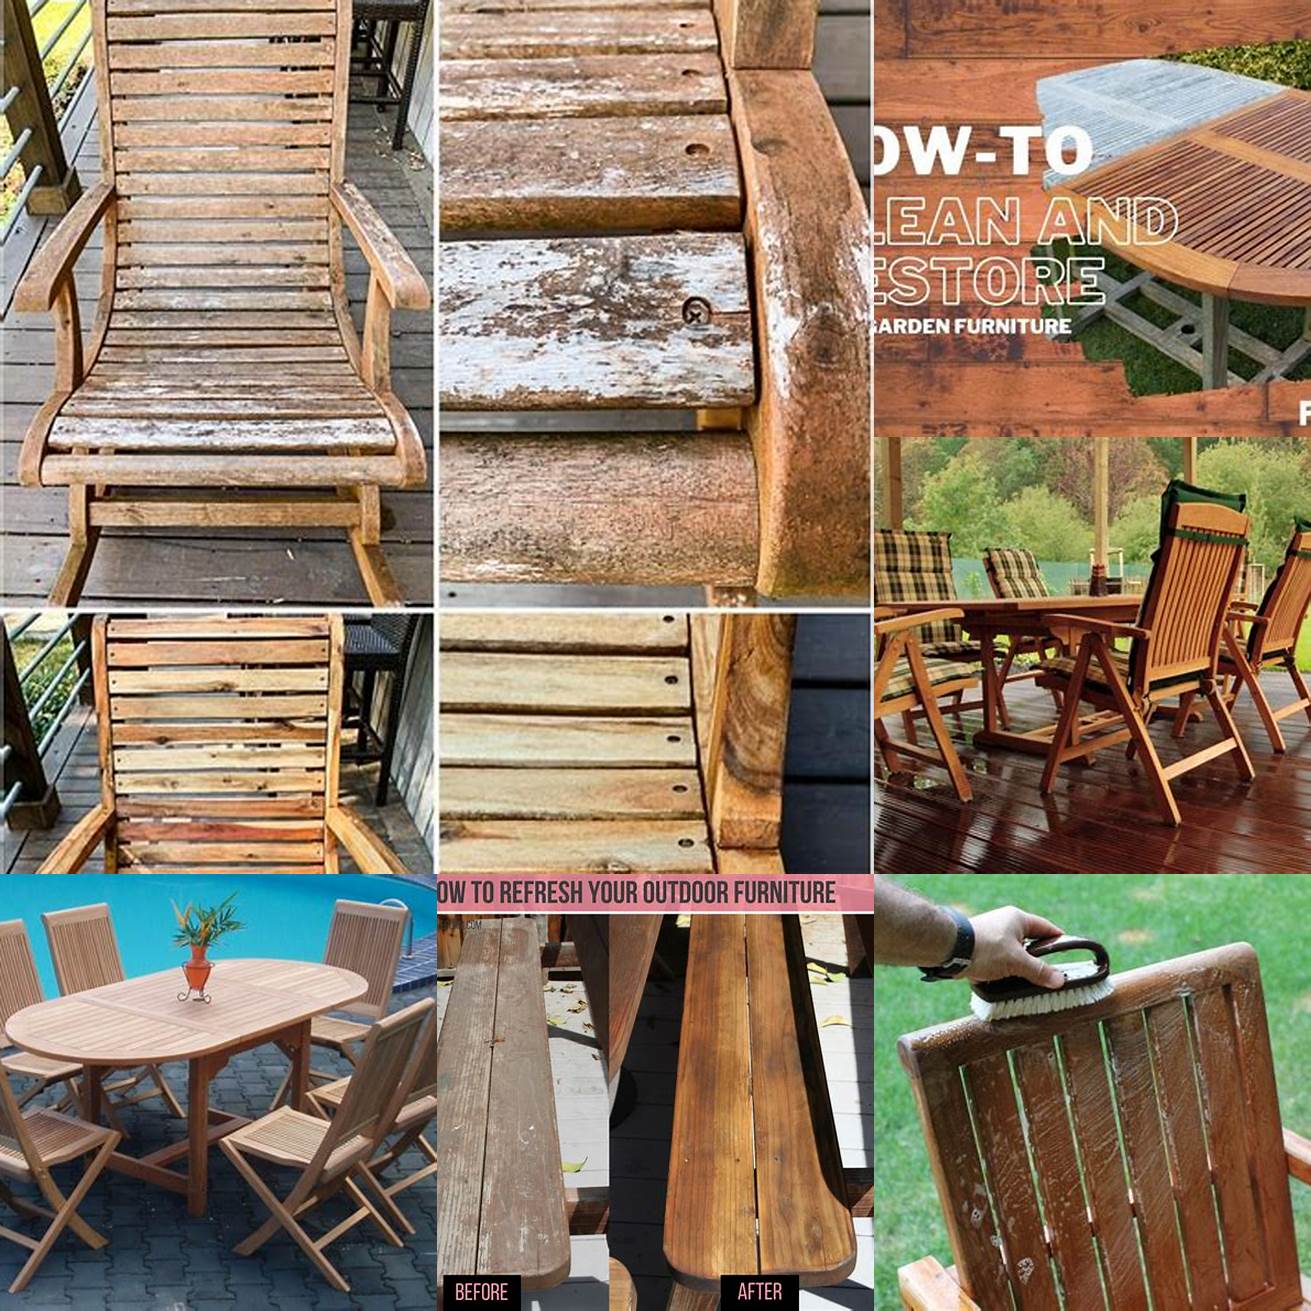 Keeping Teak Furniture Covered When Not In Use